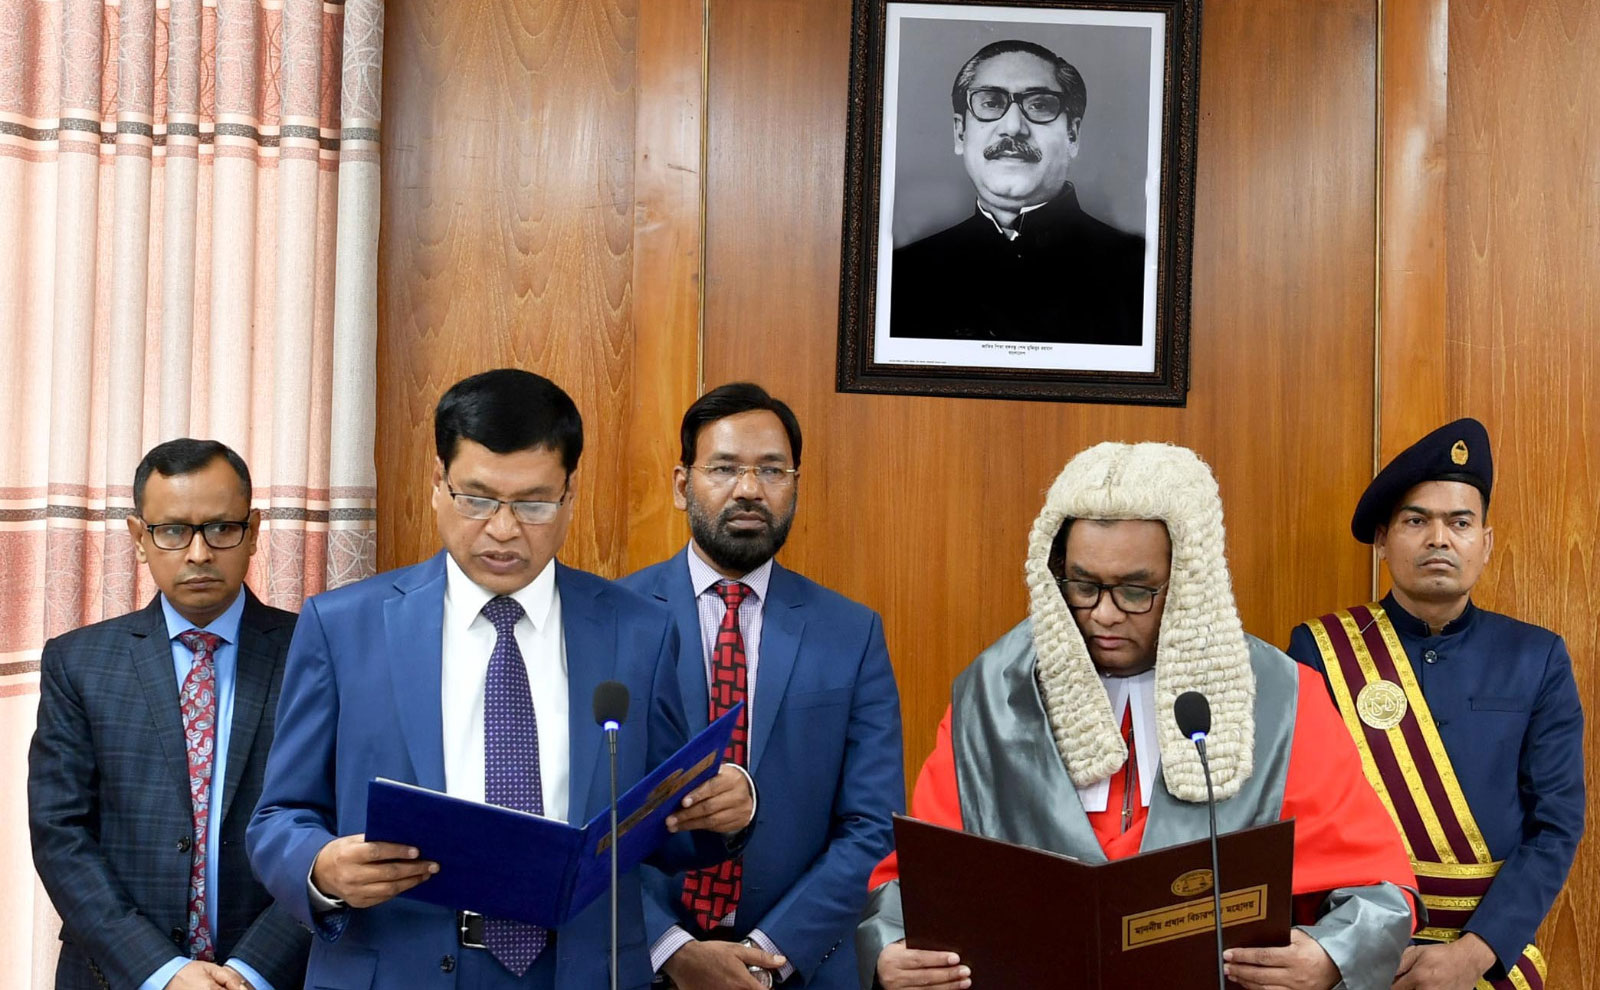 Mr. Md.Nurul Islam sworn in as the 13th Comptroller and Auditor General Of Bangladesh